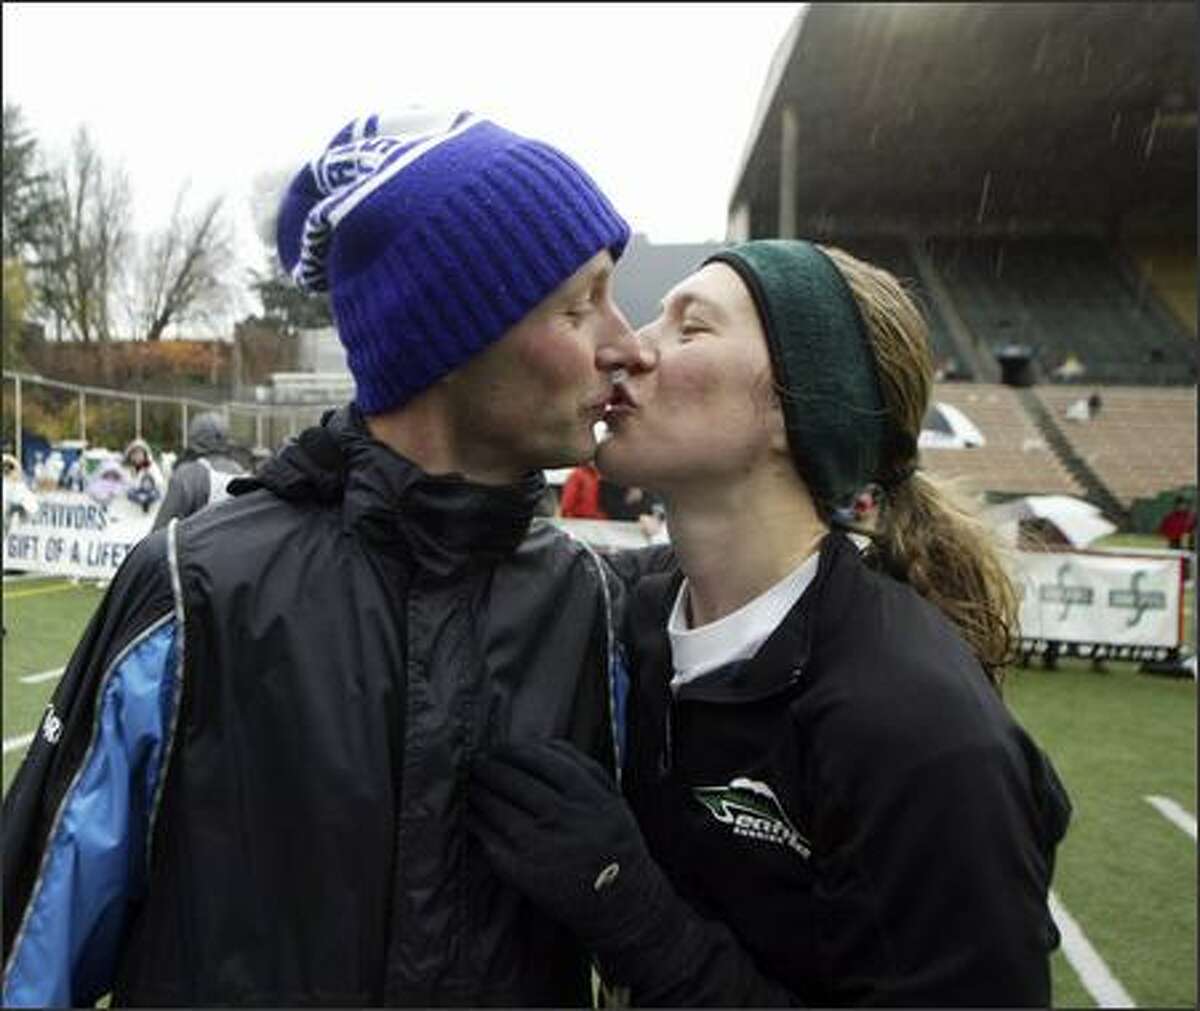 Uli Steidl, 34, and Trisha Steidl, 29, share a kiss after becoming the first married couple to sweep the men's and women's races in the Seattle Marathon. Uli scored his eighth win with a time of 2:25:54, while Trisha placed first with a time of 3:01:36.